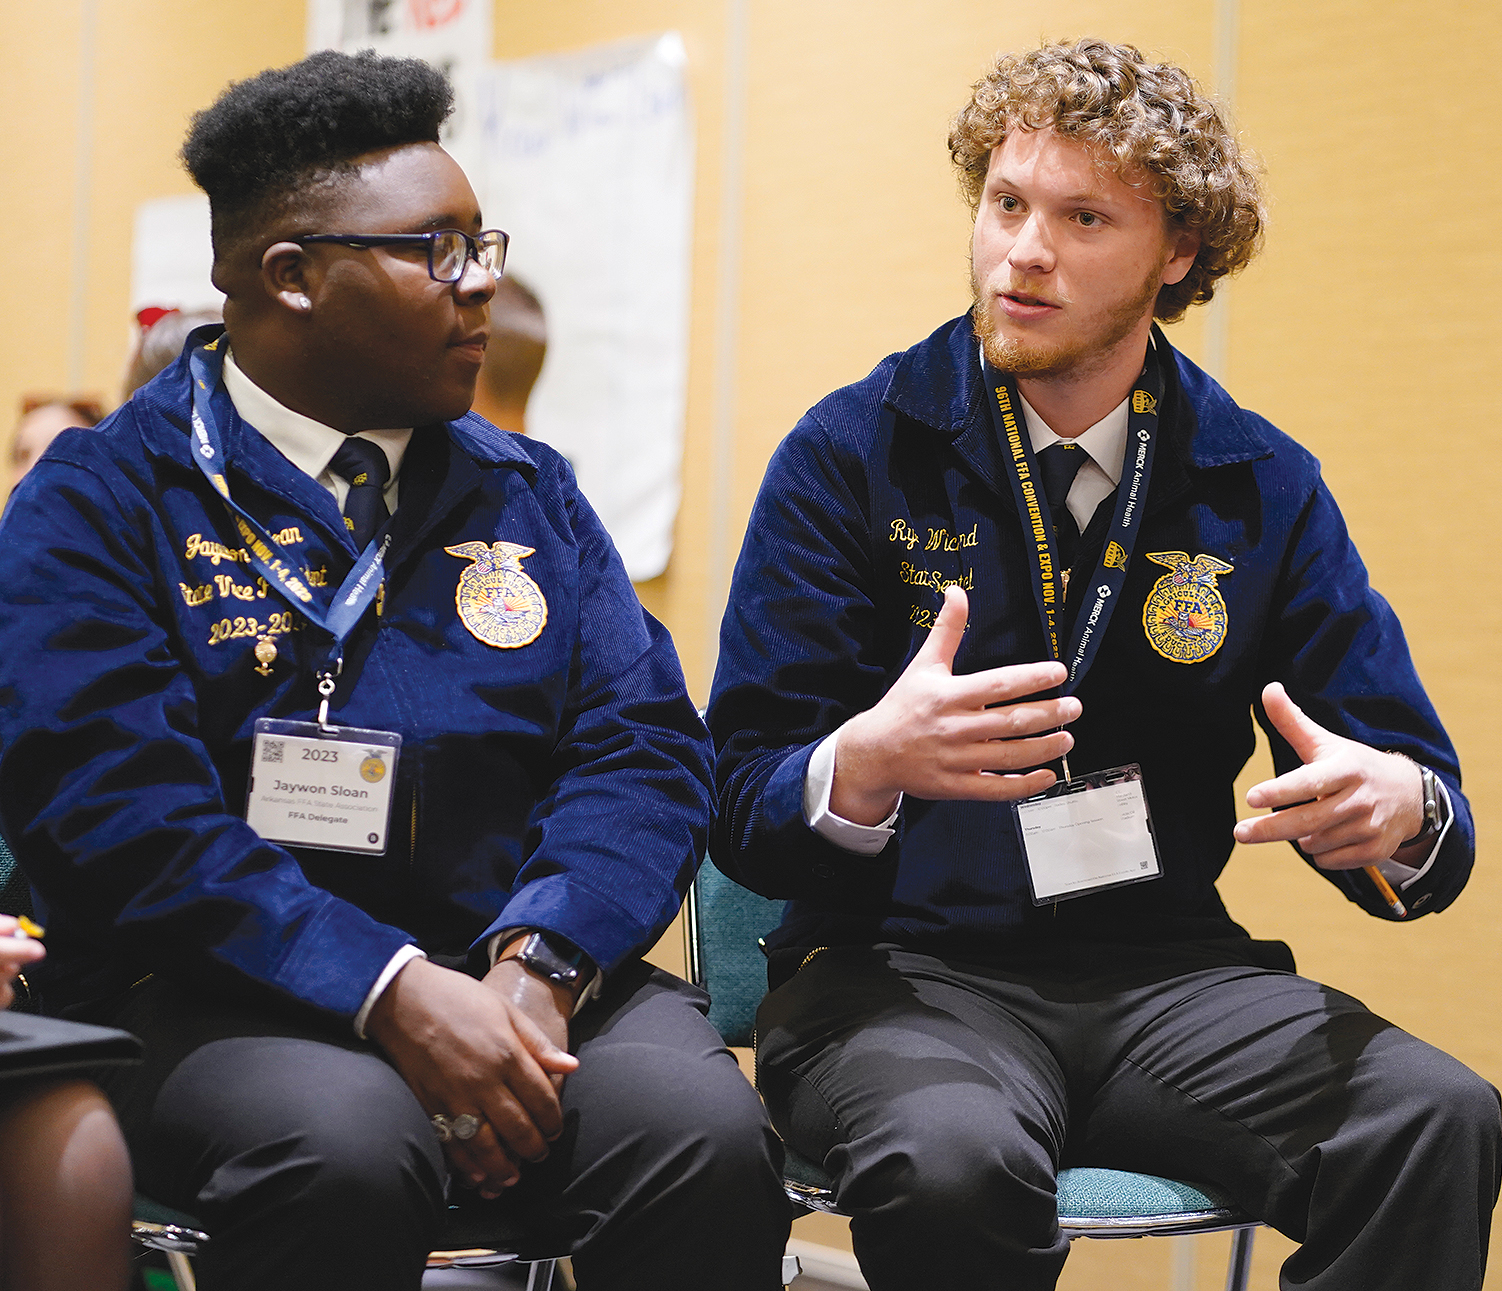 96th National FFA Convention & Expo - Delegate Session